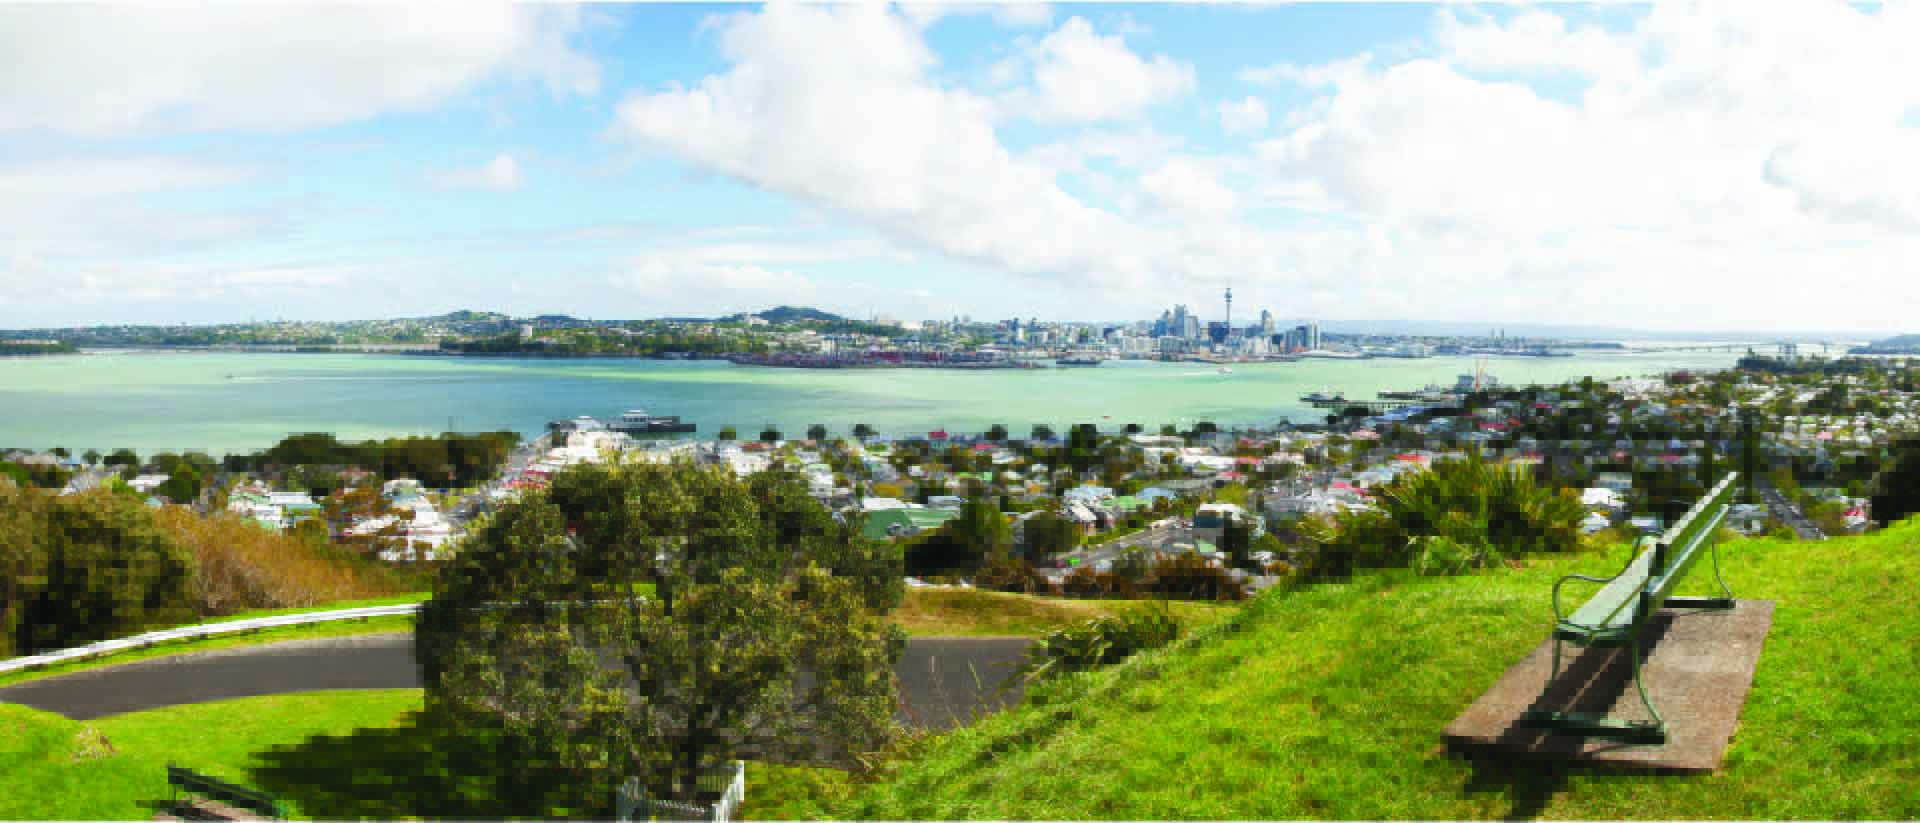 A bench on top of a grassy hill overlooking the Manukau Harbour with Auckland CBD in the background.